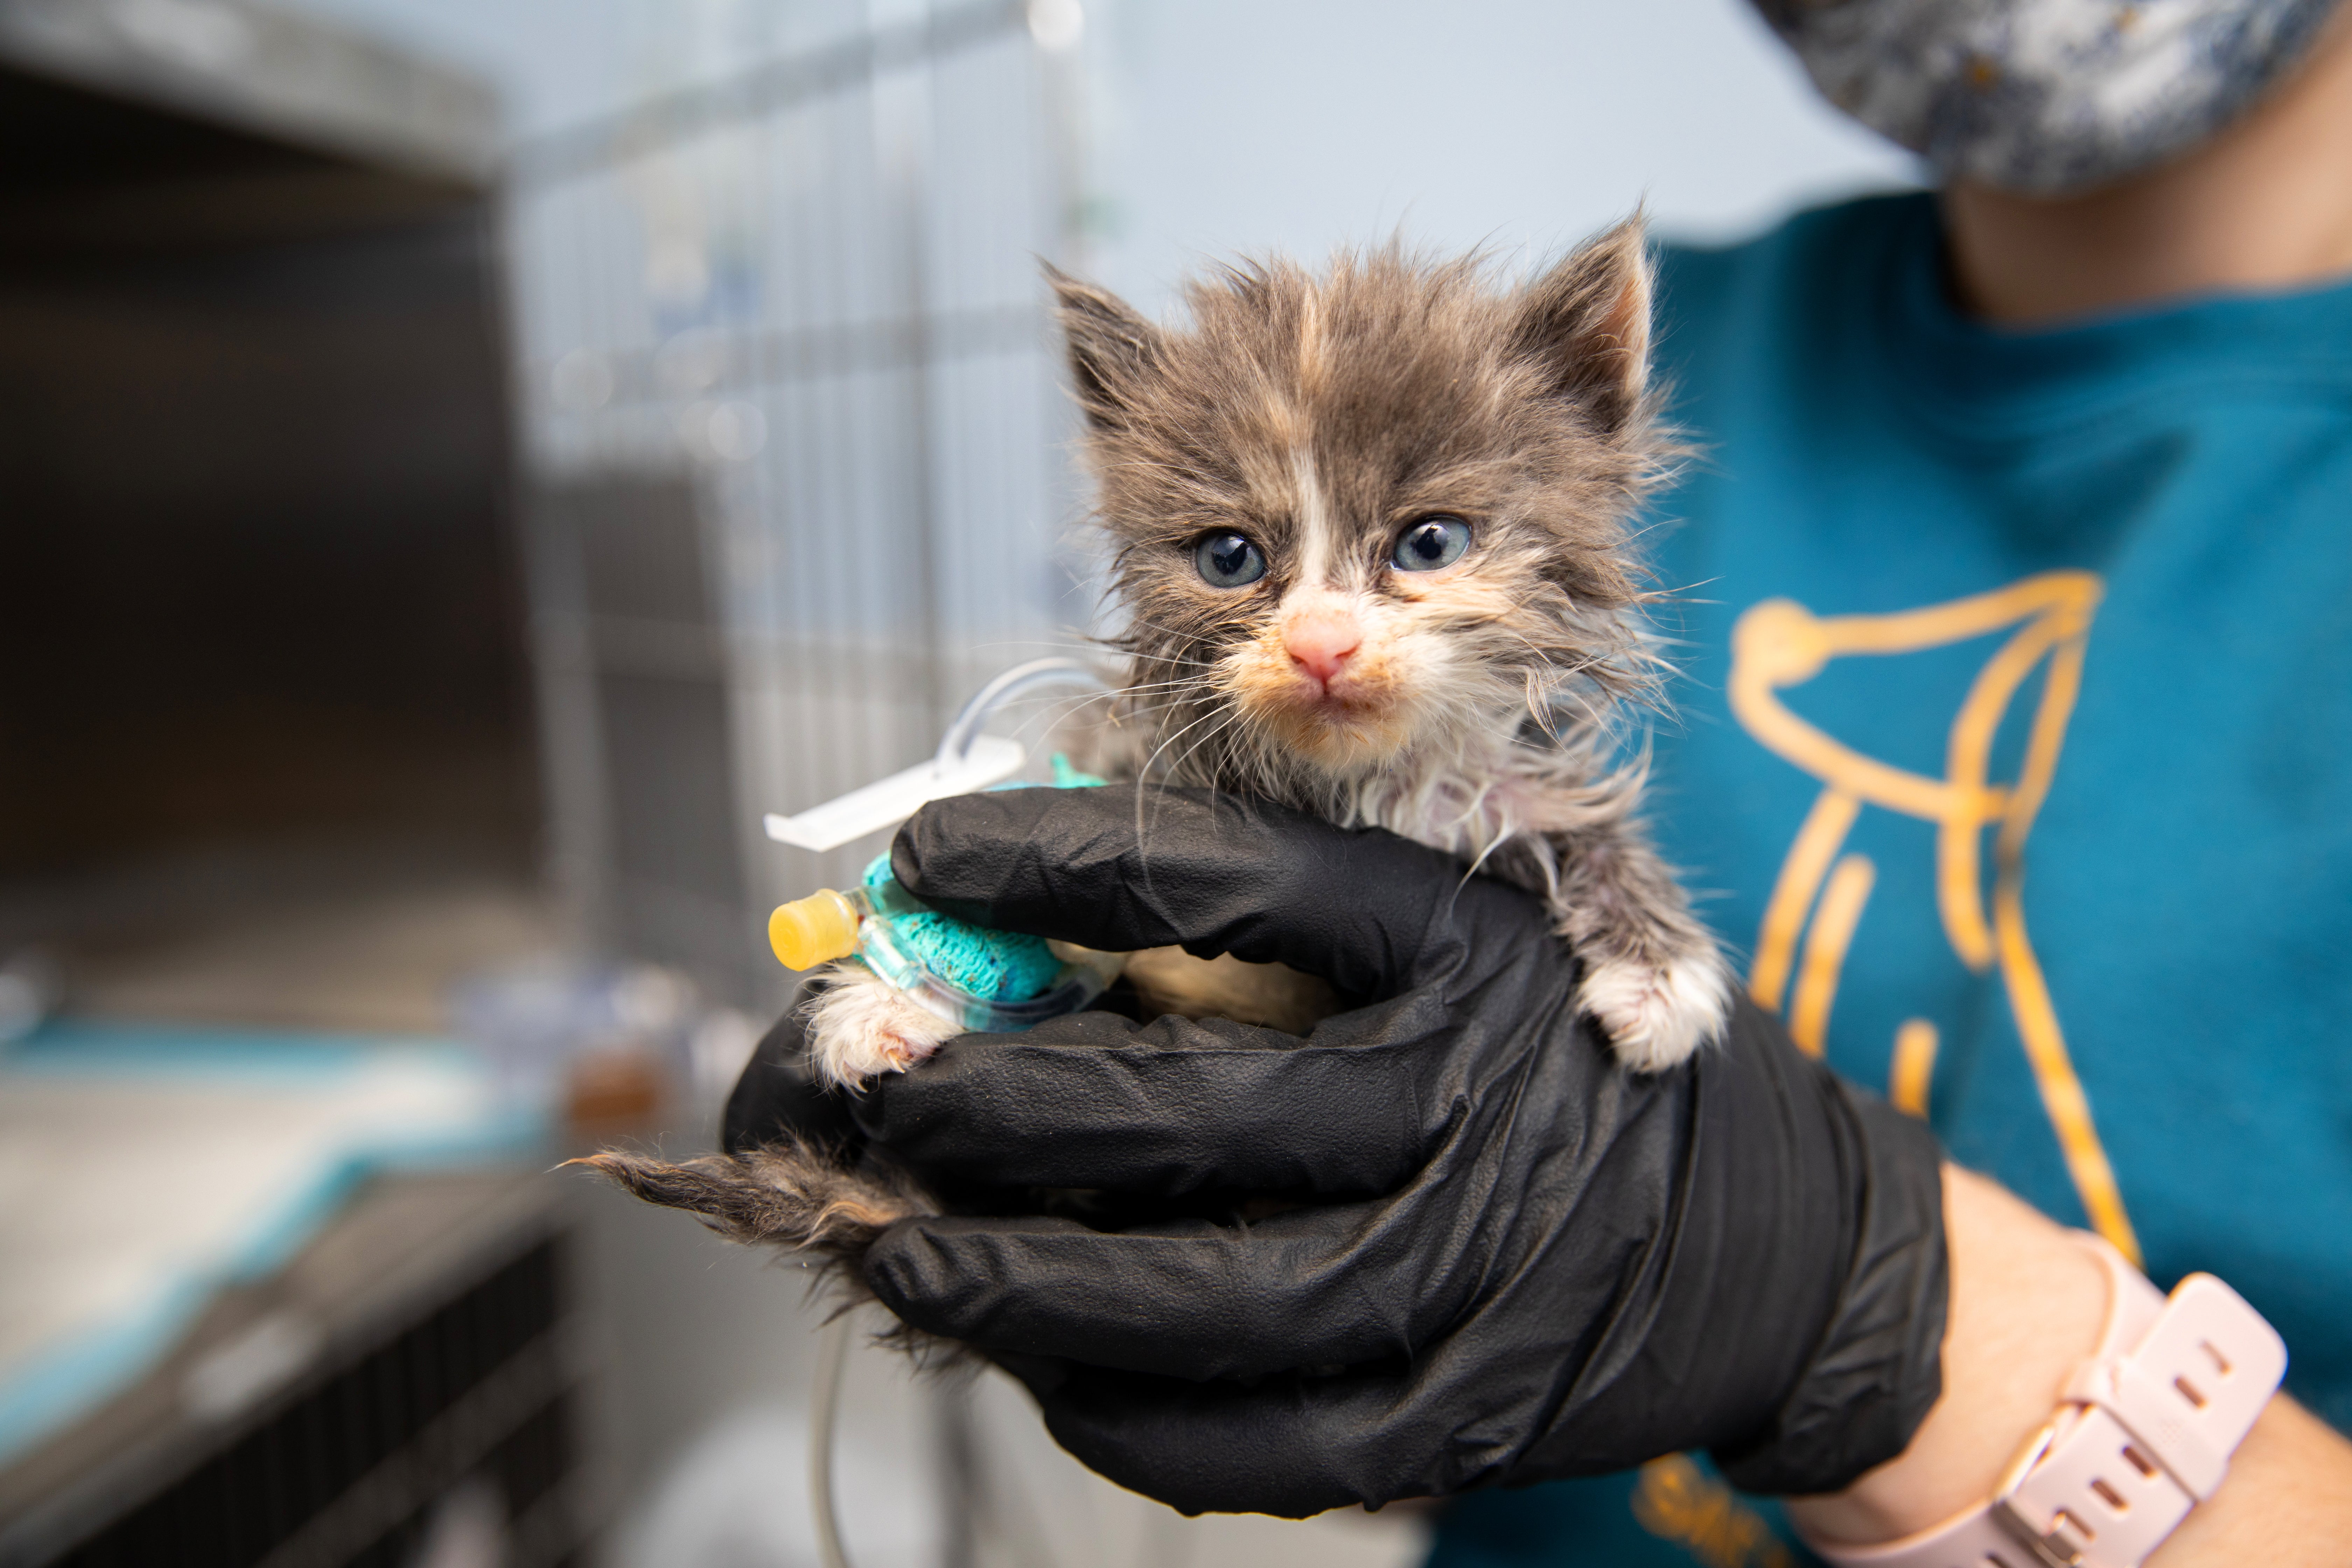 Tiny kitten being cared for by a person in a veterinary setting